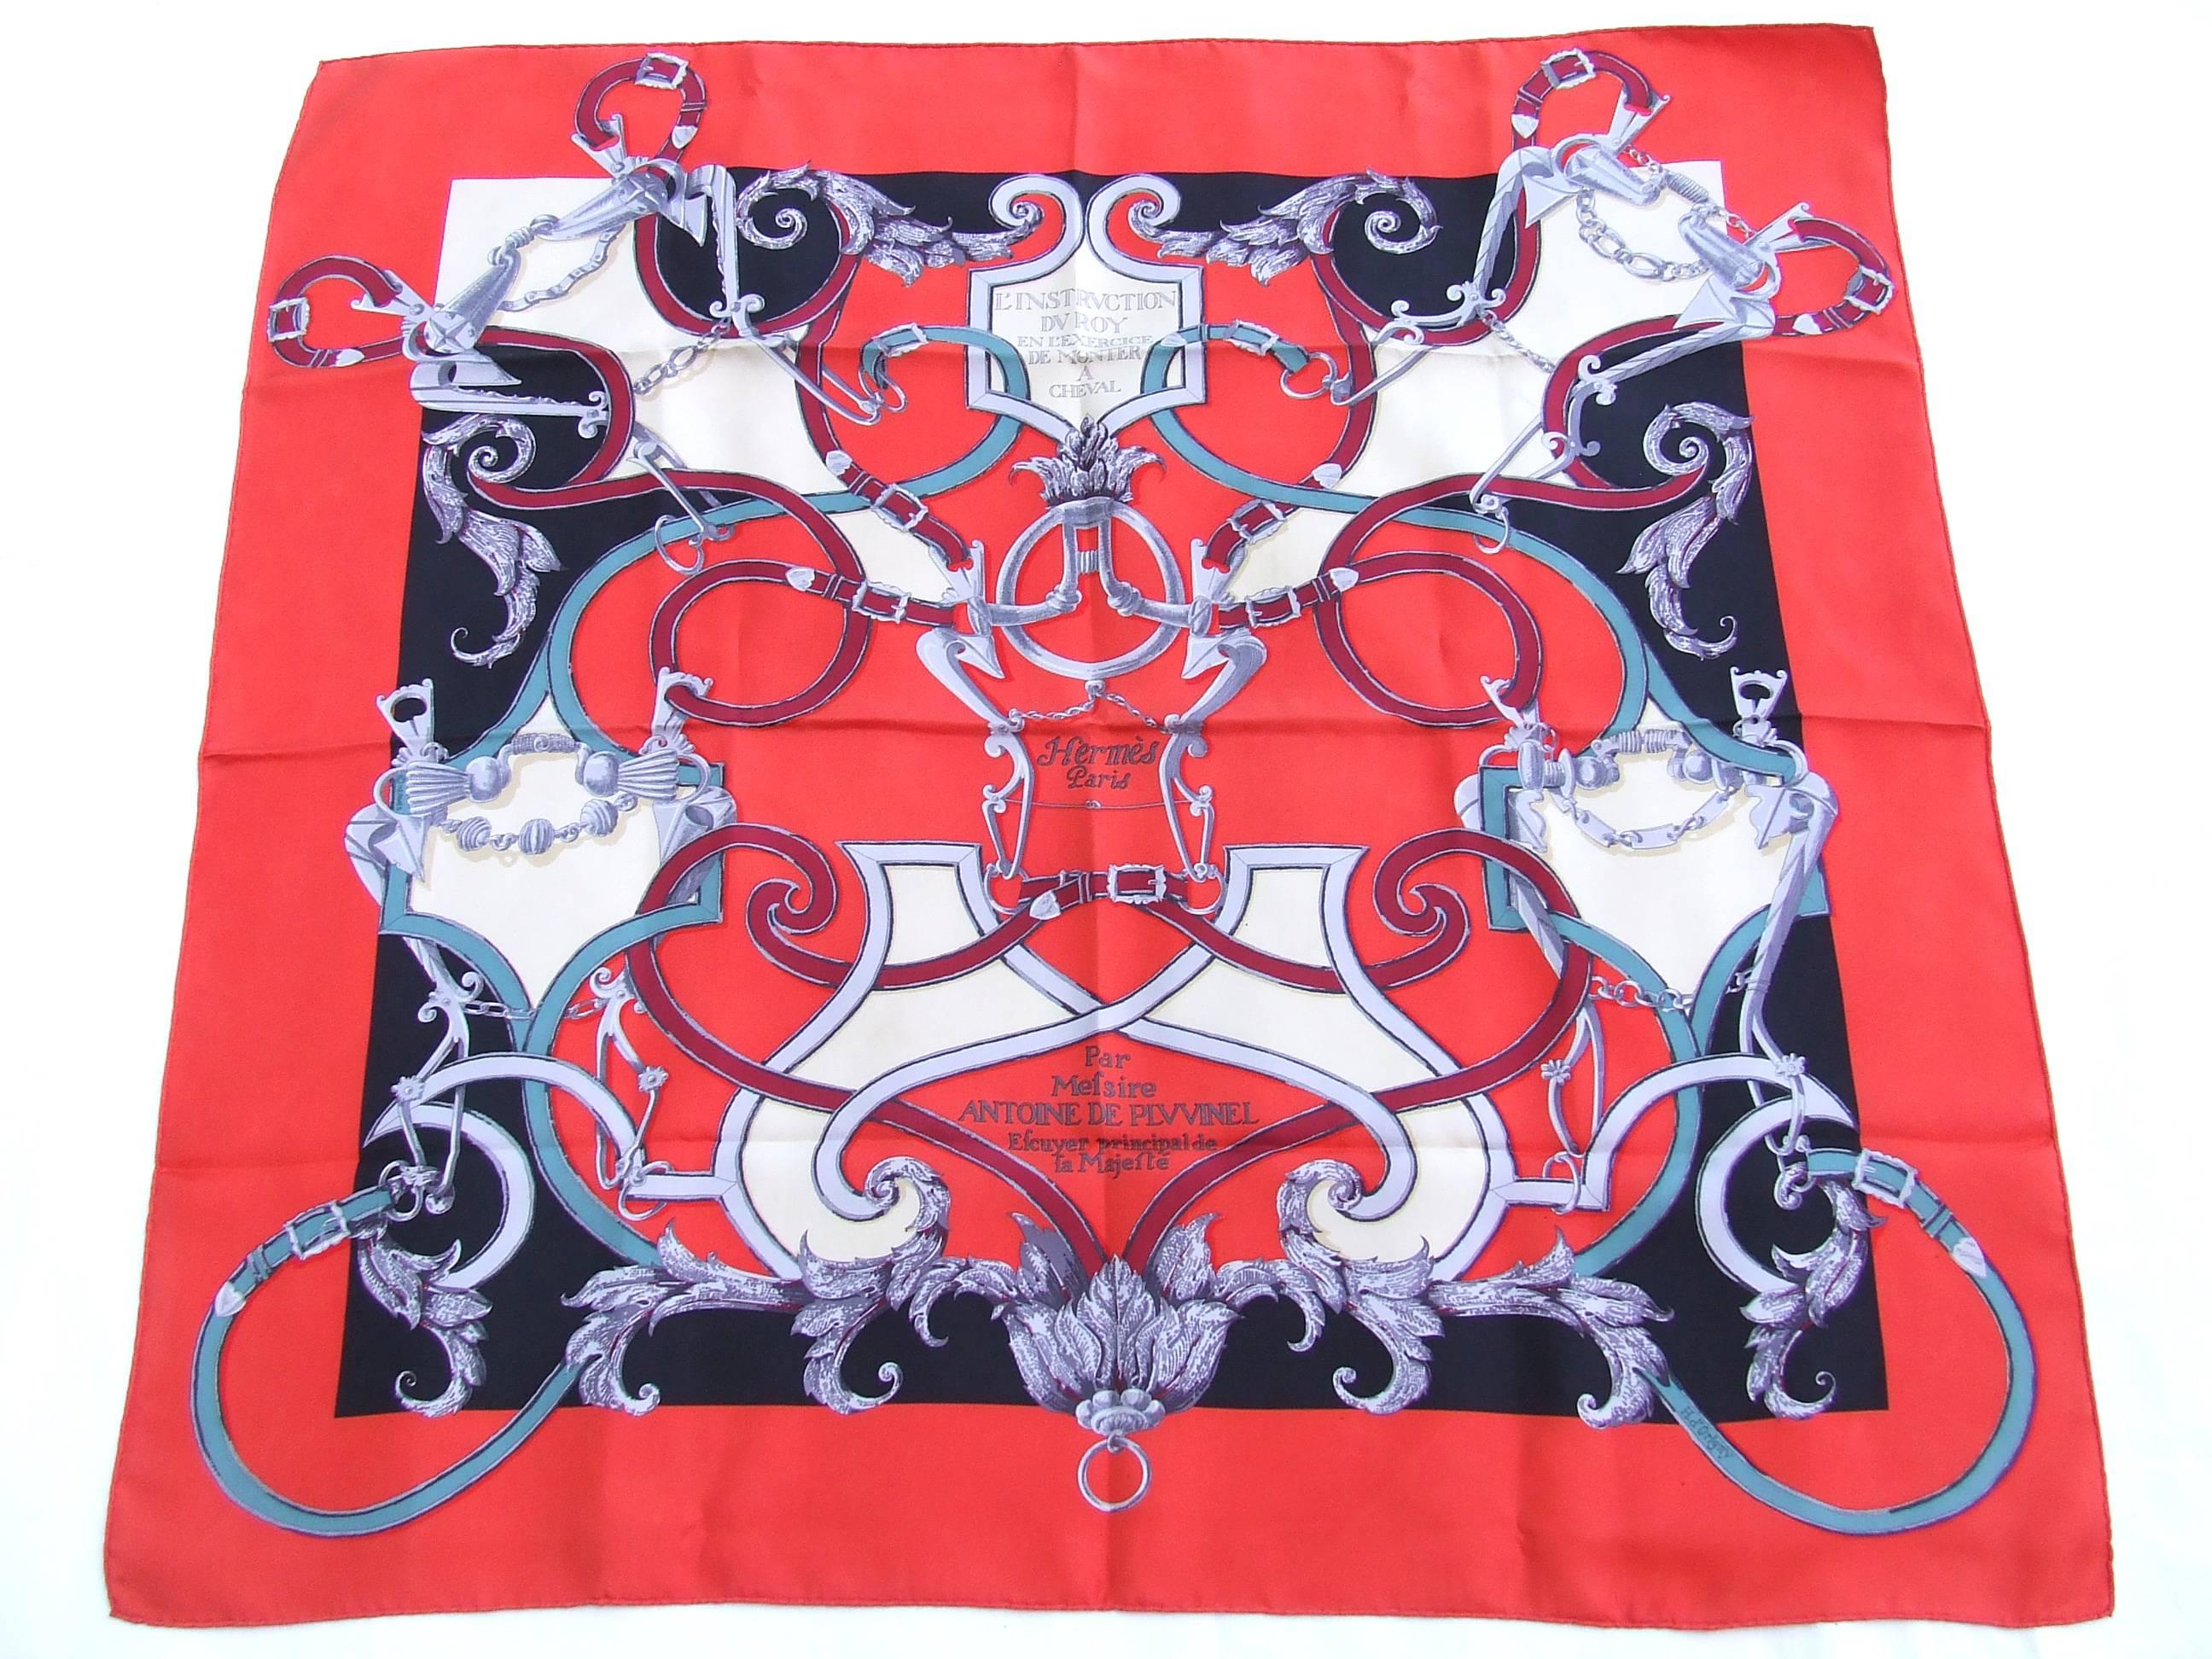 Here is one of my favorites Hermes scarves !

So beautiful, so chic ... colors are gorgeous

Pattern: "L'INSTRVCTION DU ROY EN L'EXERCICE DE MONTER A CHEVAL"

Designed by Henri d'Origny in 1993; I think this one is a reissue

Made in